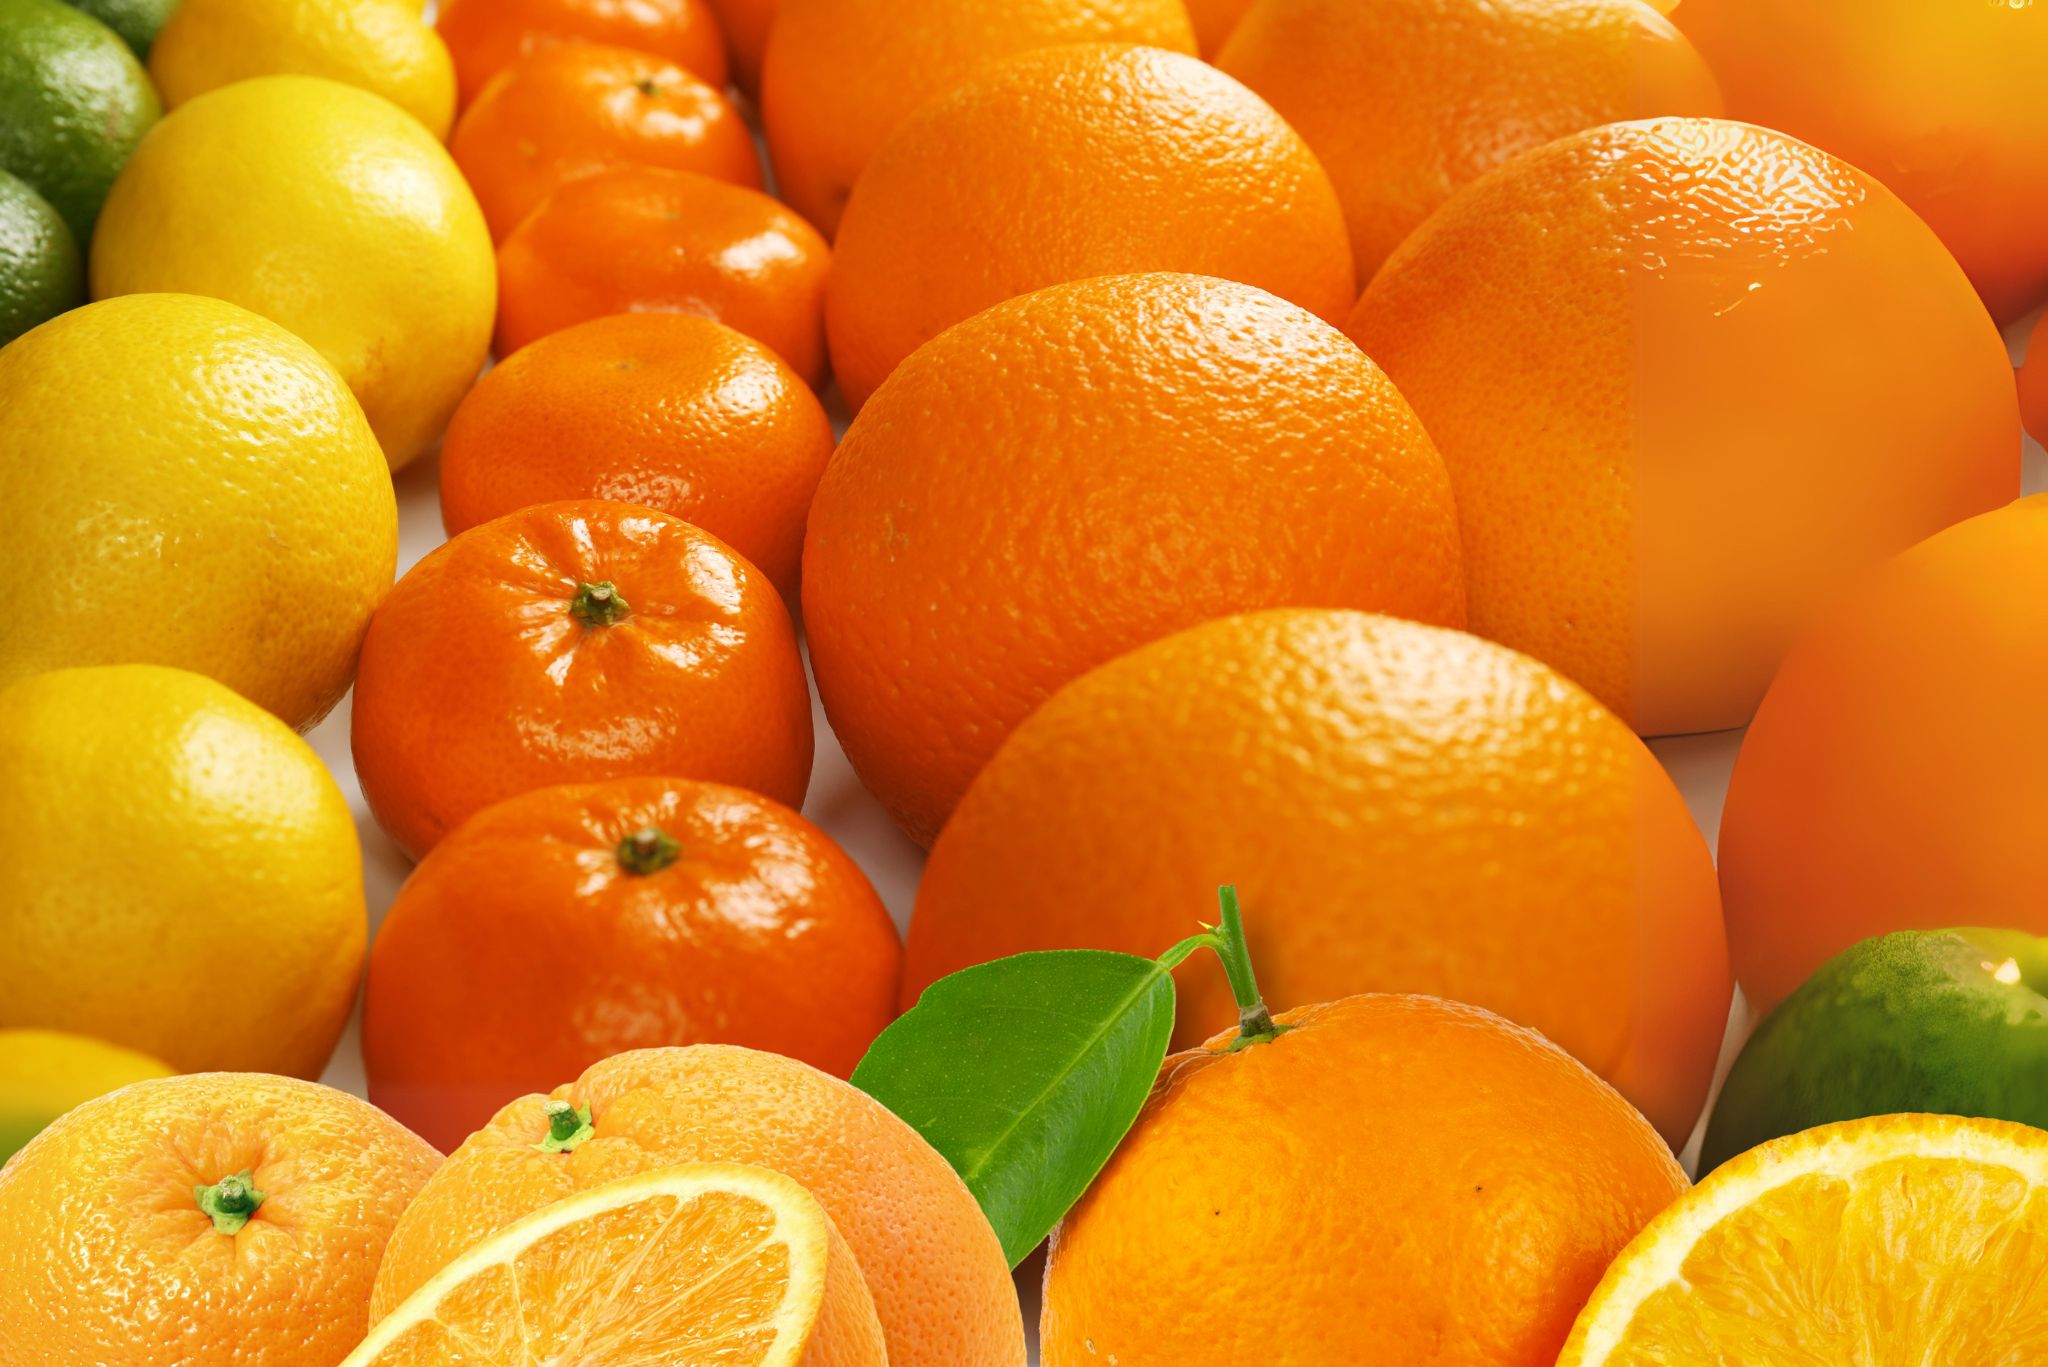 Different types of oranges on a table